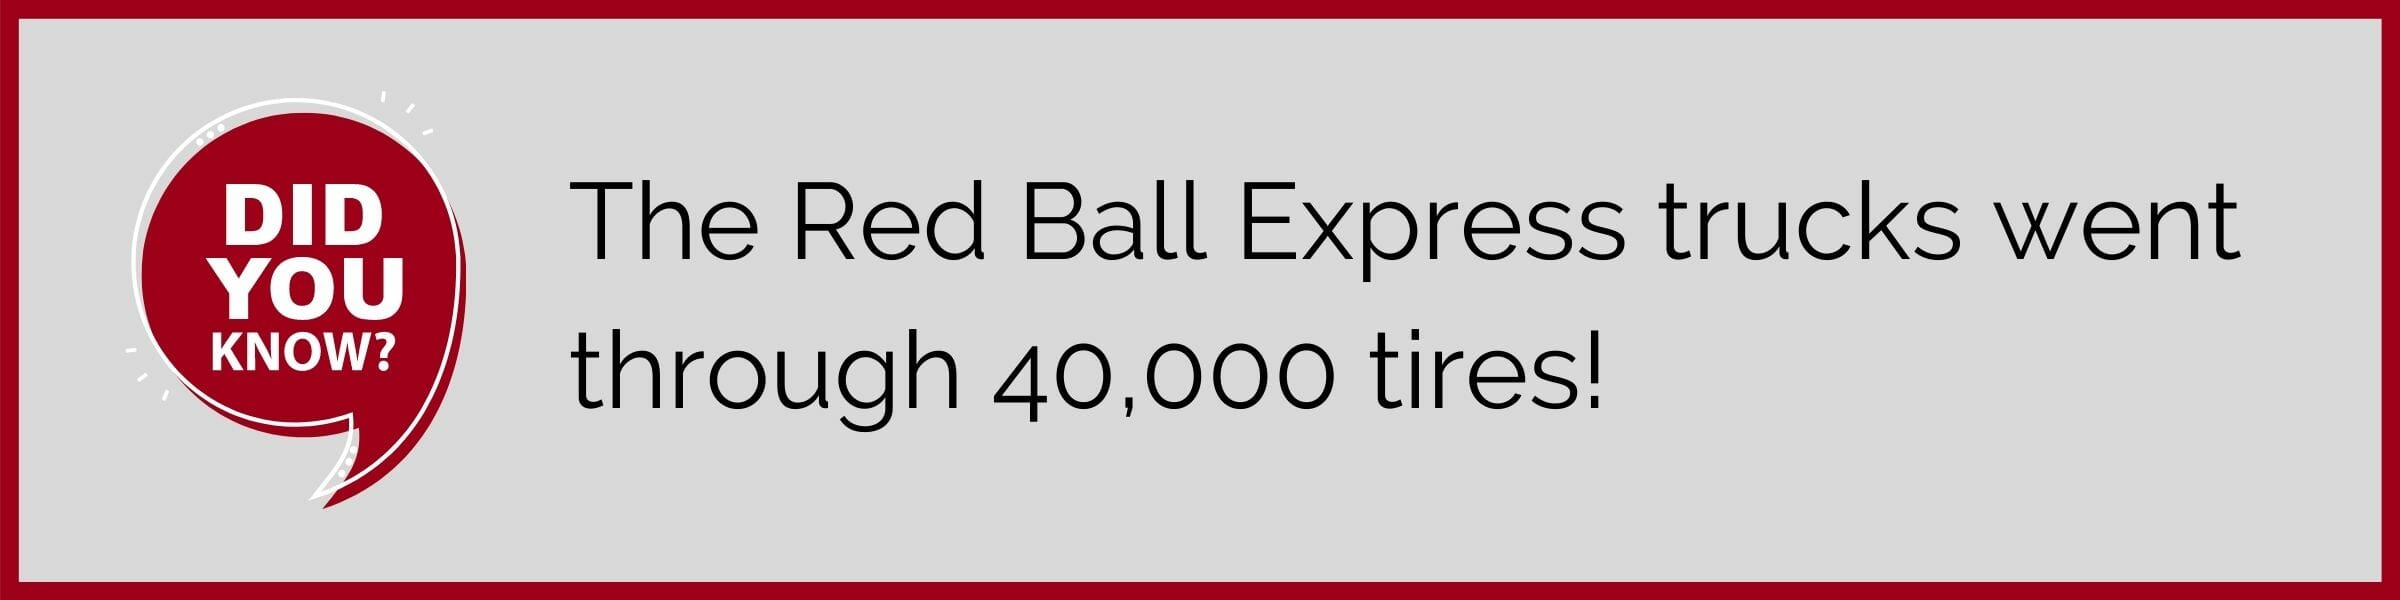 The Red Ball express went through 40,000 tires!